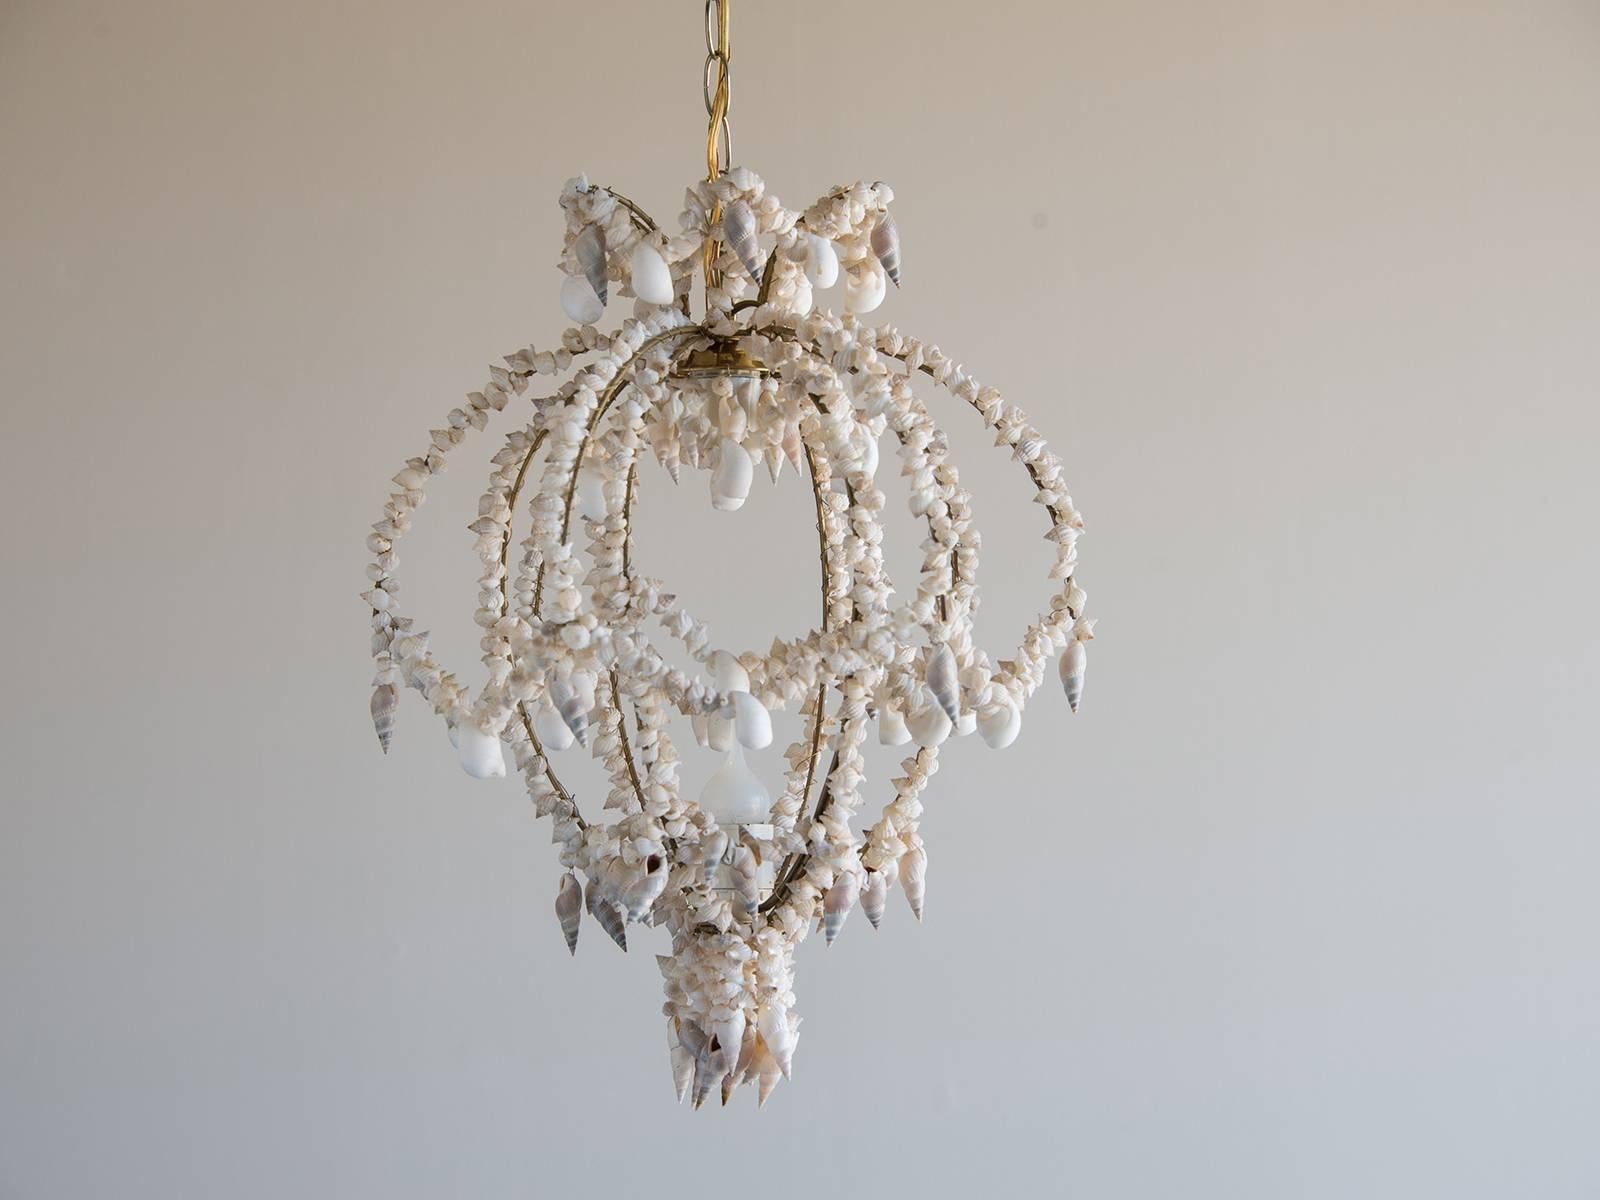 Vintage Italian handmade seashell chandelier, circa 1960. The charming shape of this intimately scaled fixture is highlighted by the variety of shells used to accentuate its profile. The fixture has both an upper and lower socket for a bulb and has